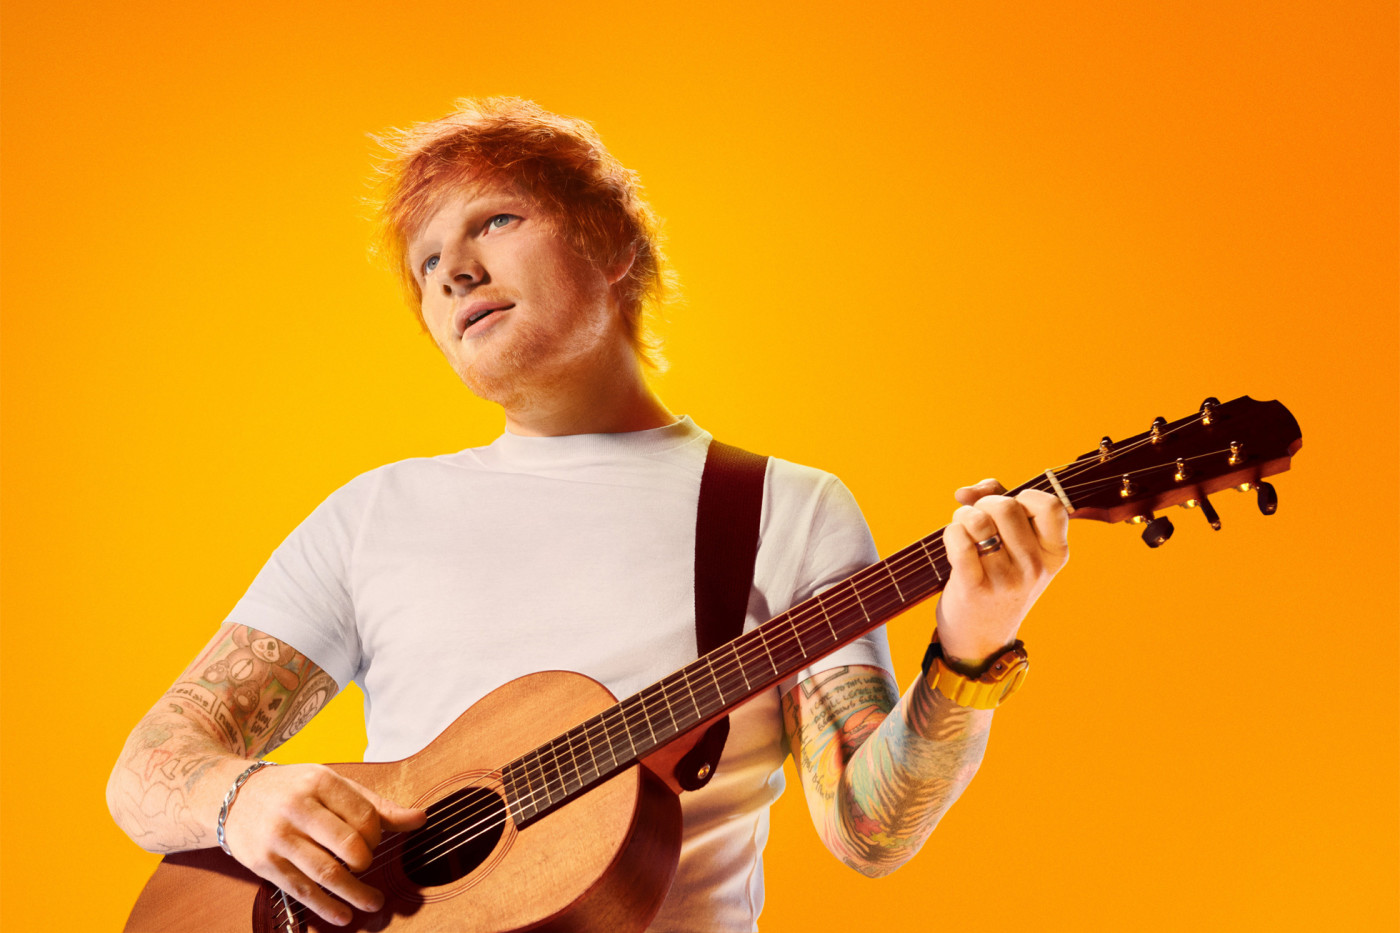 Apple Music Live is back: several concerts planned, including Ed Sheeran